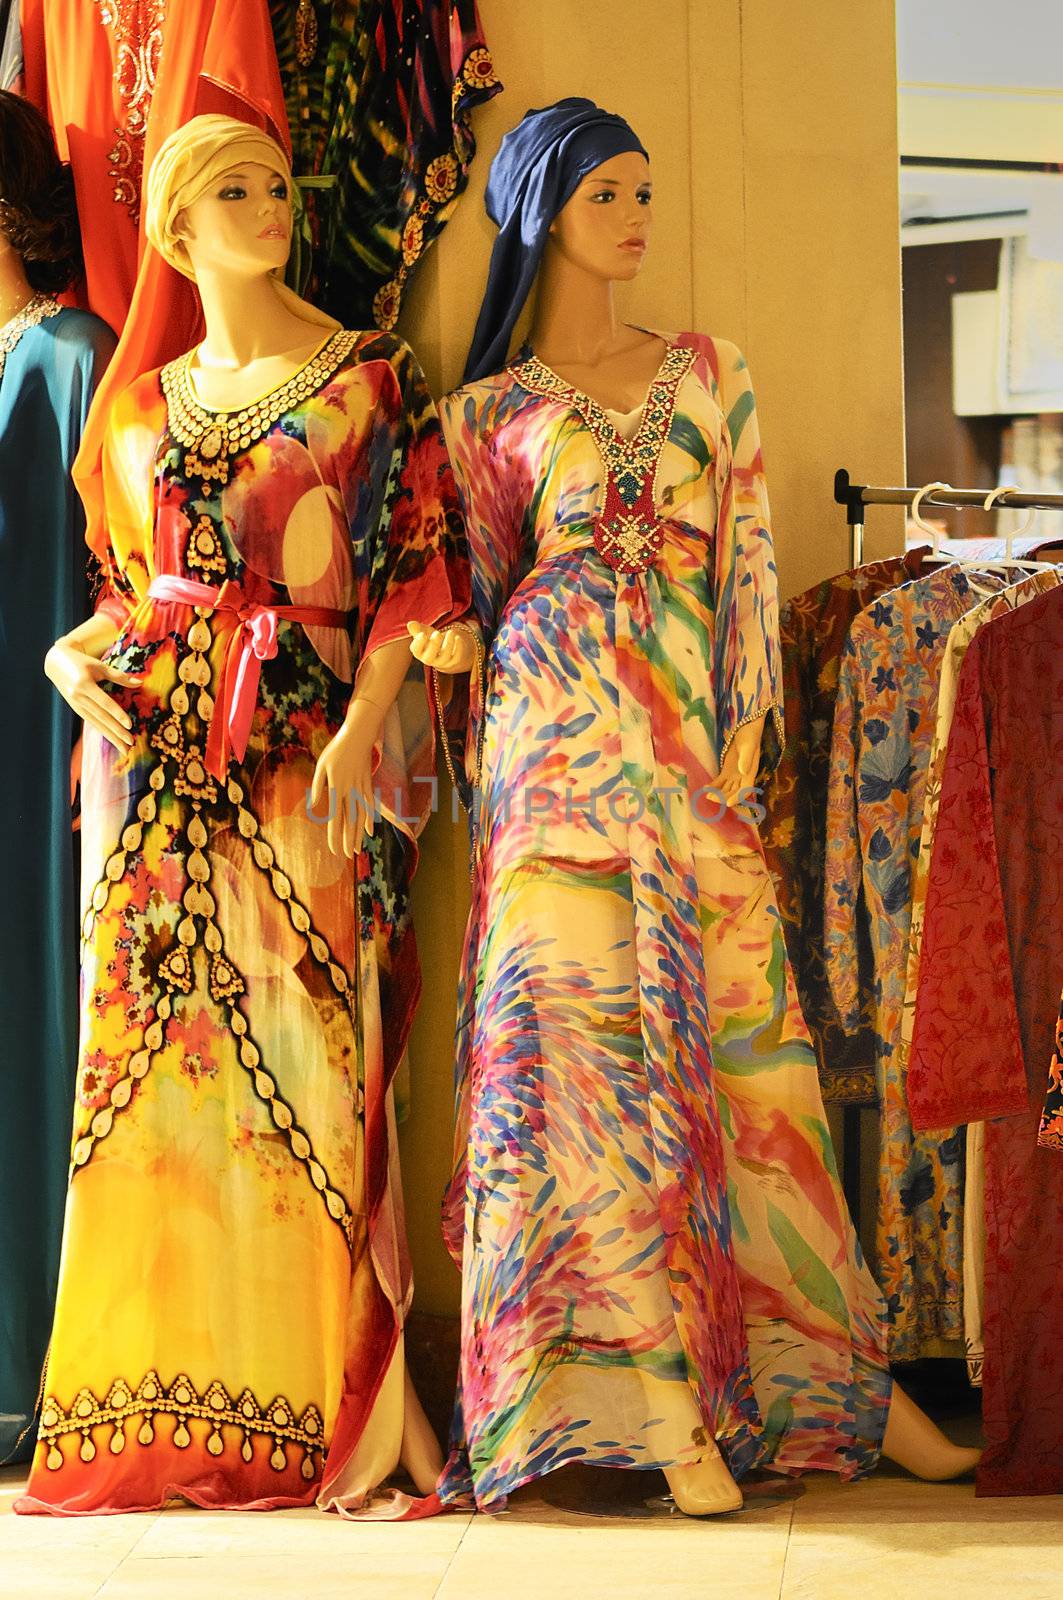 Mannequins in clothes shop with oriental and colored dresses